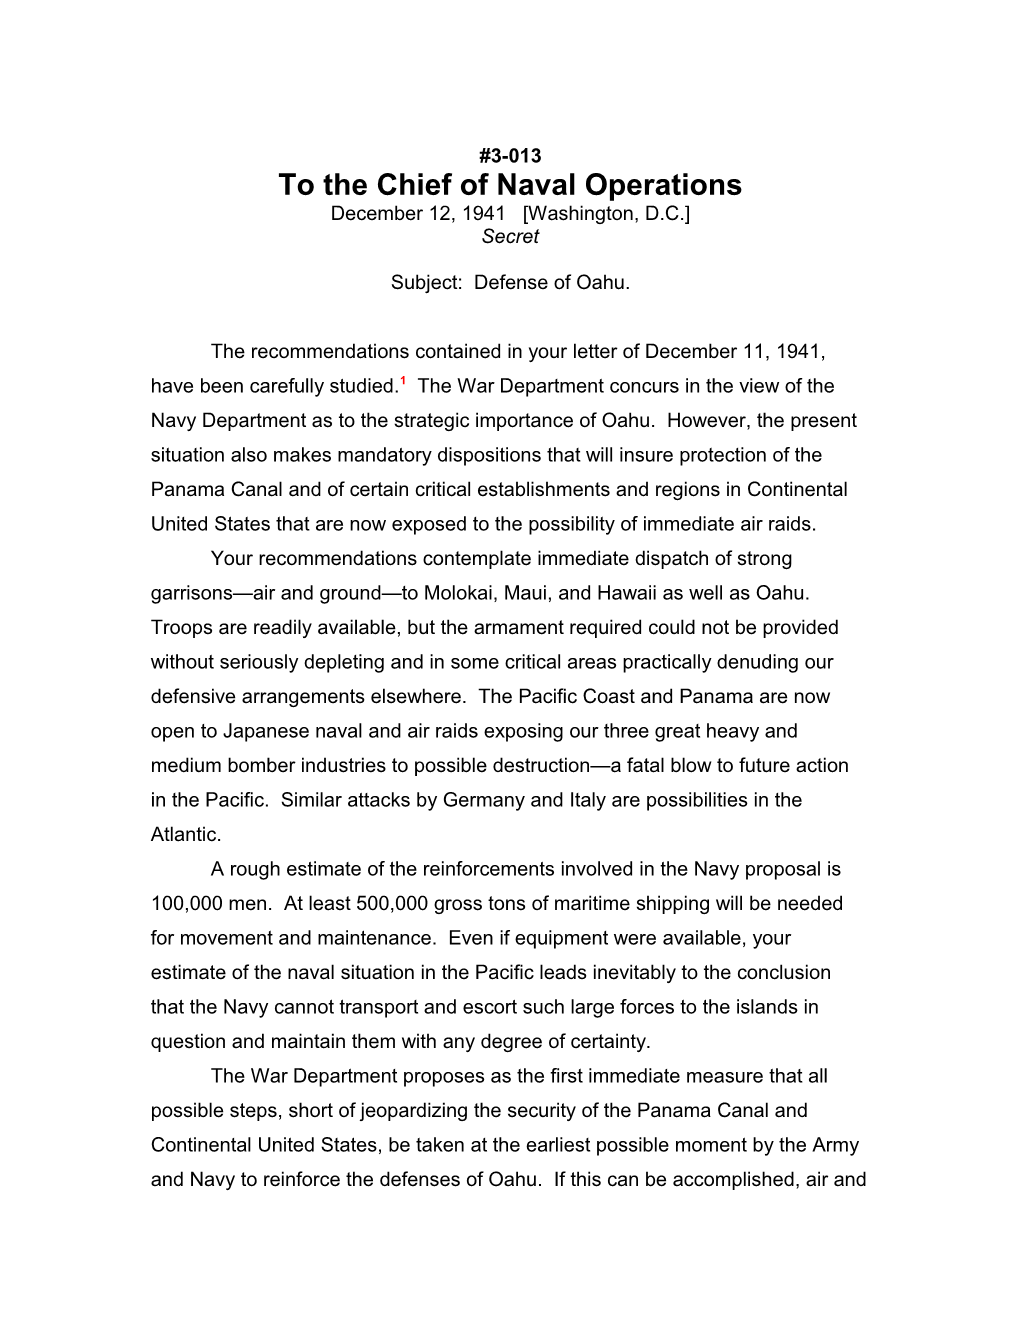 To the Chief of Naval Operations